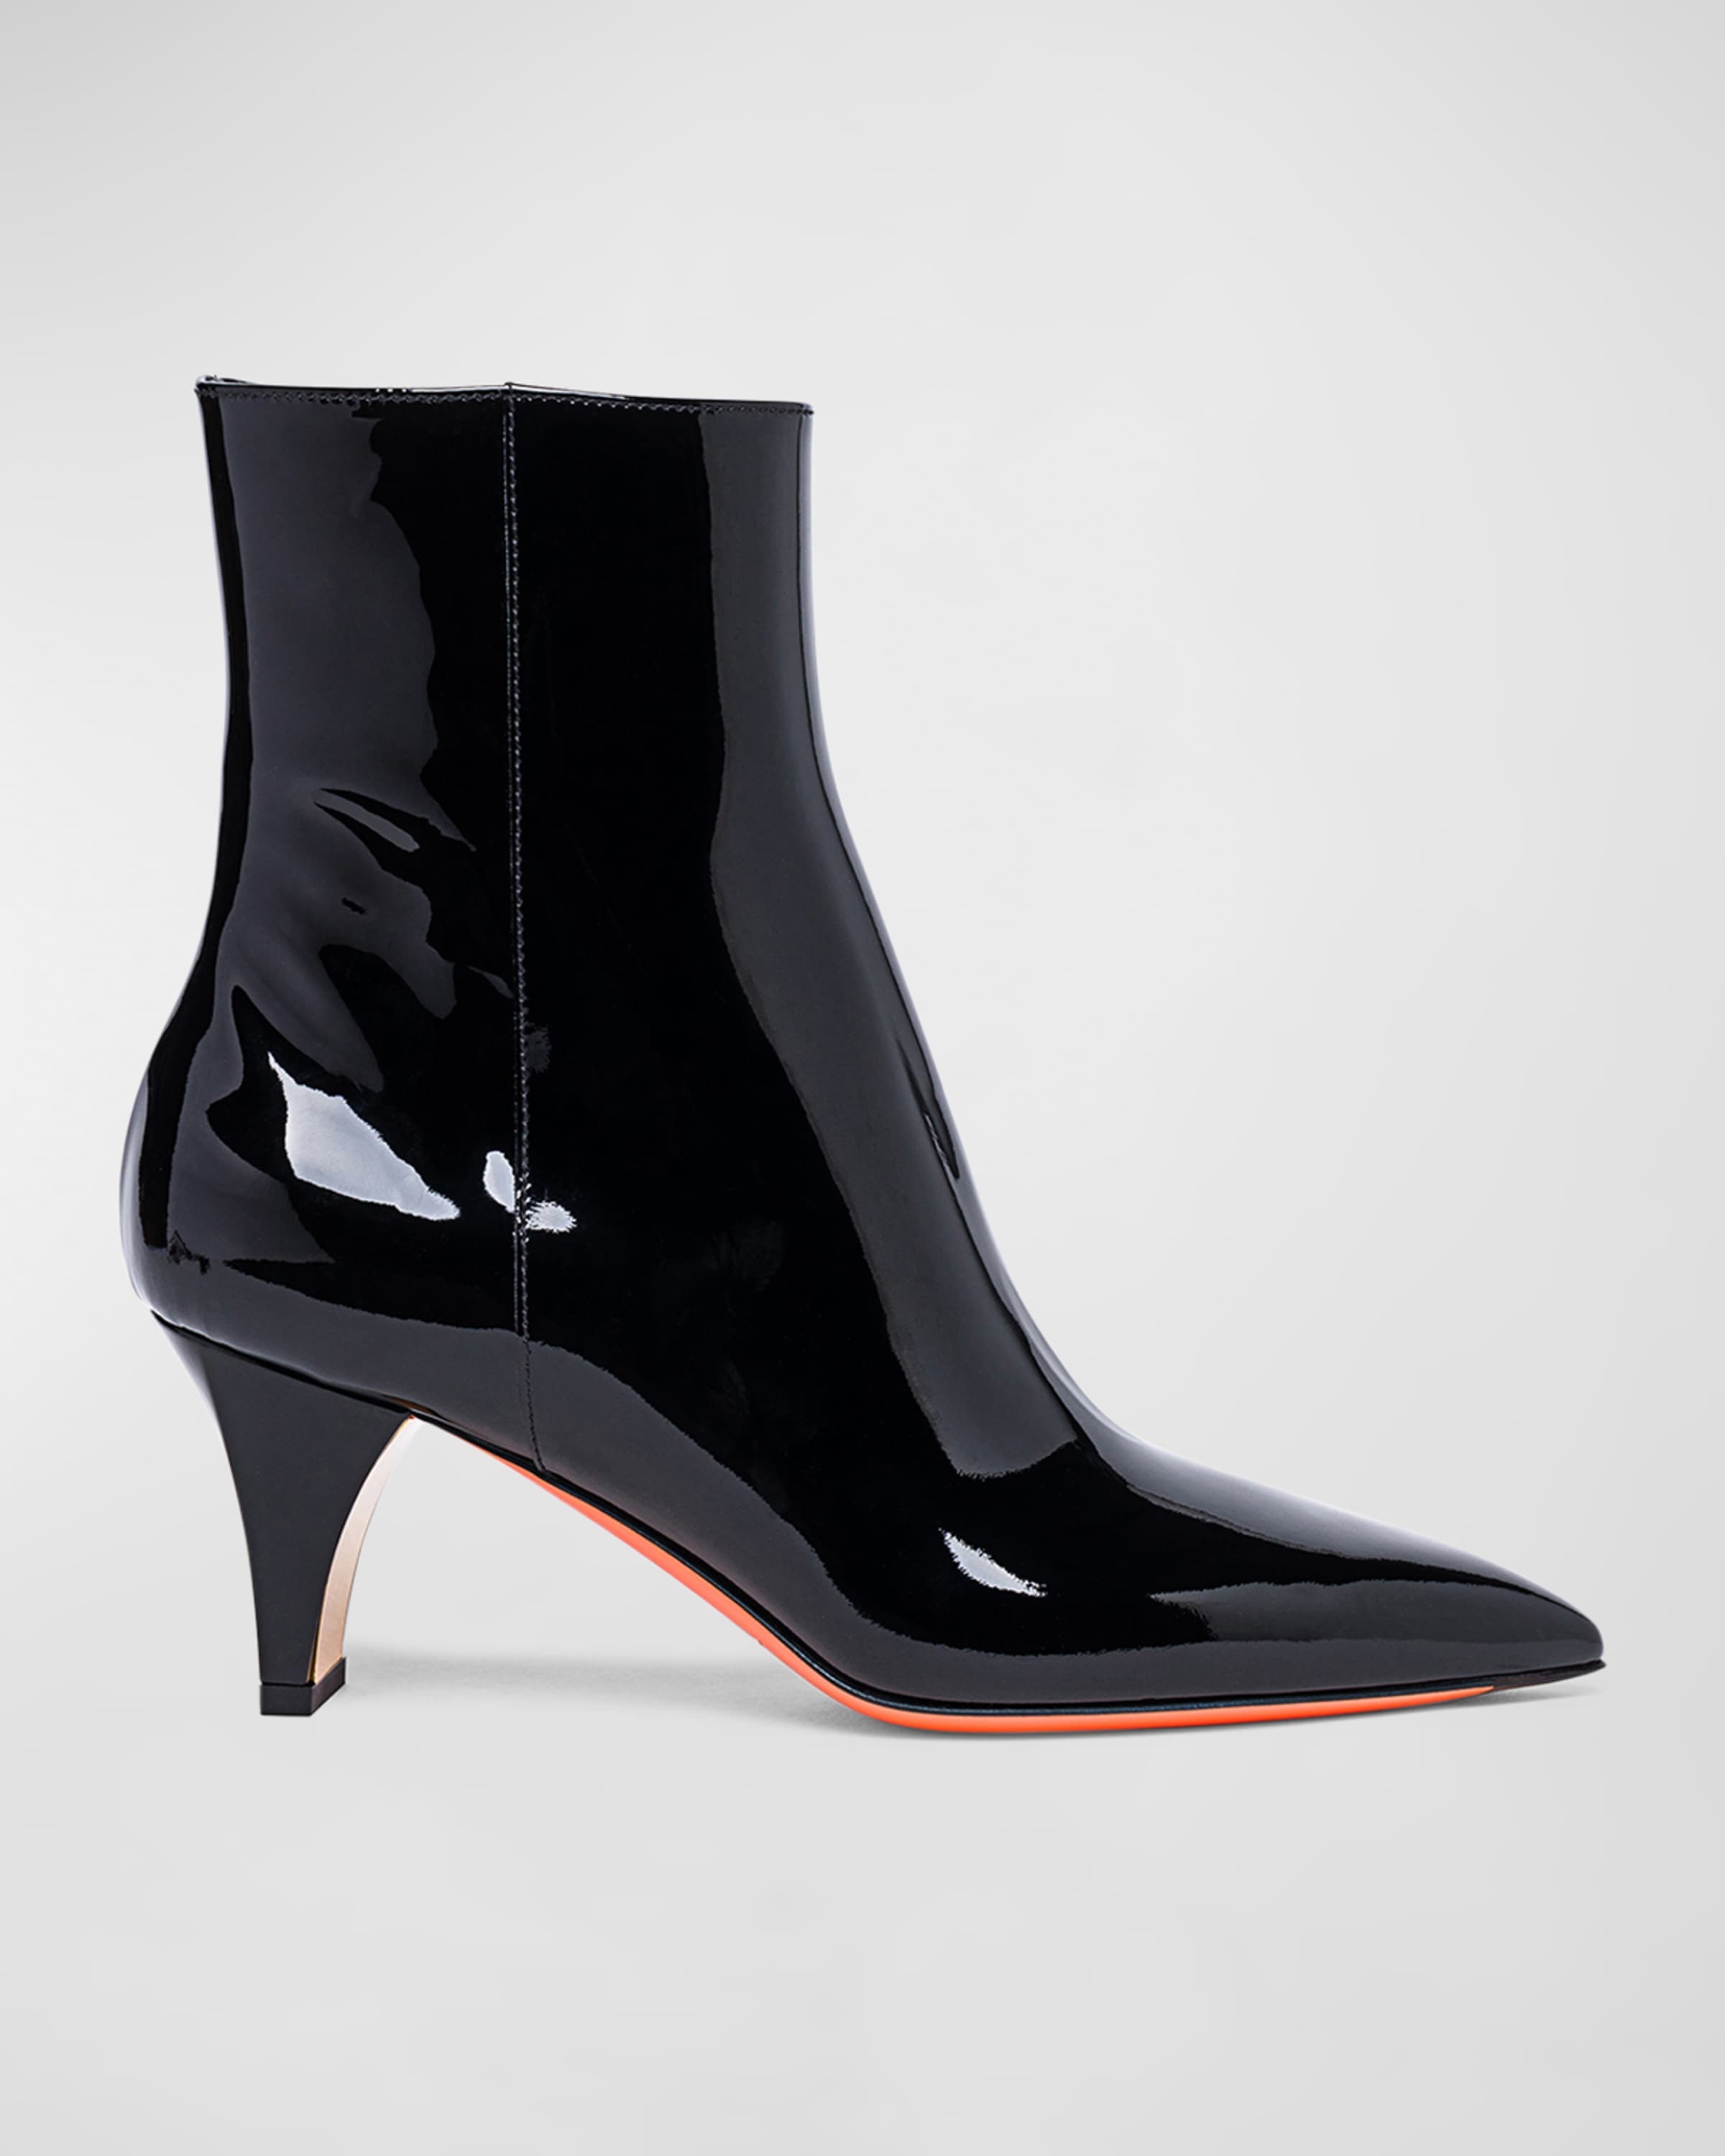 Delfica Patent Leather Booties - 1